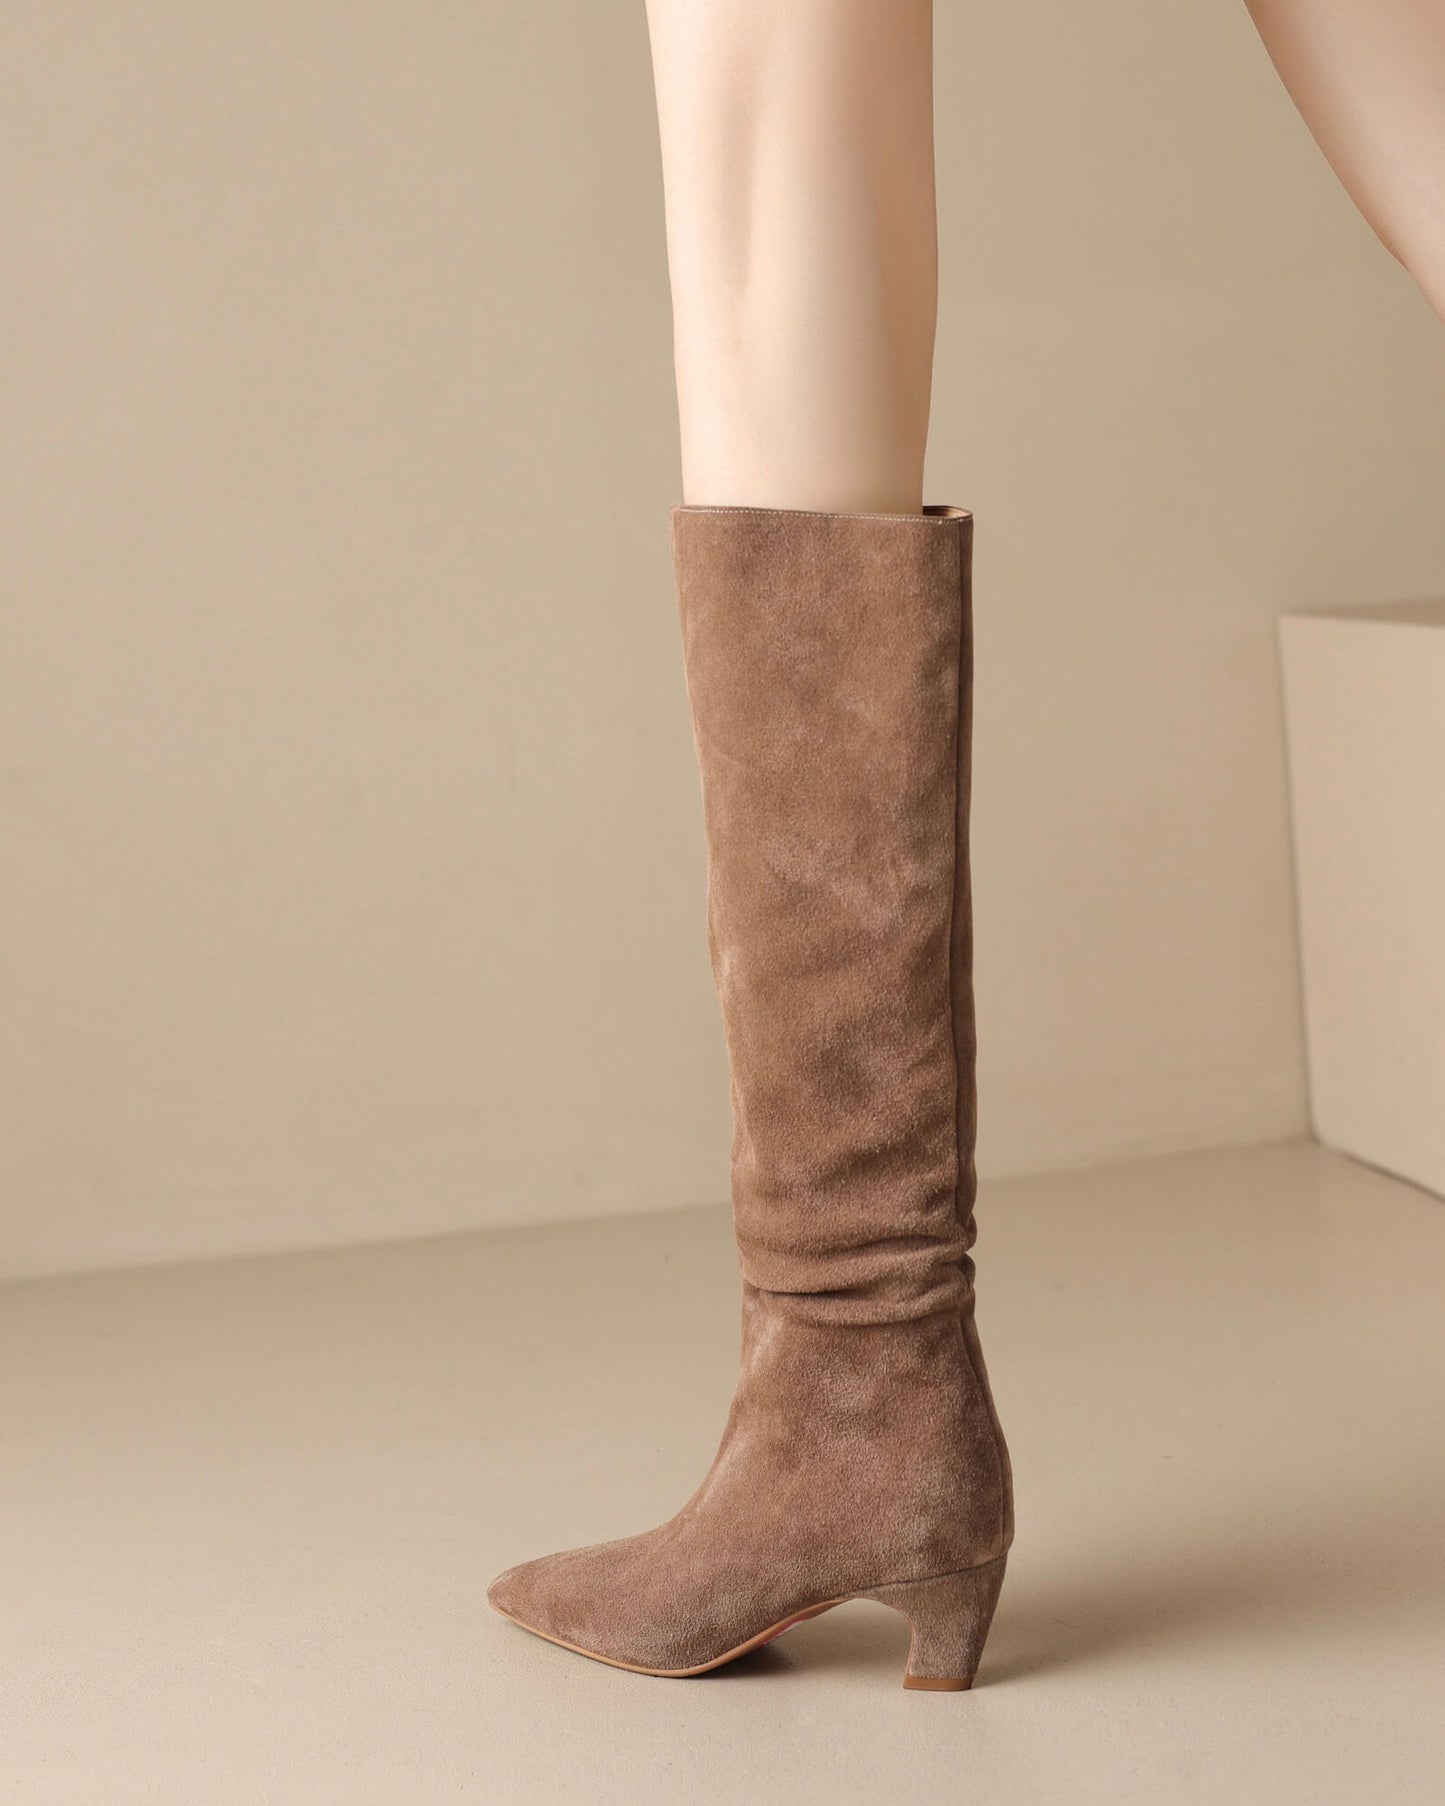 Miolo-suede-knee-high-boots-khaki-model-3